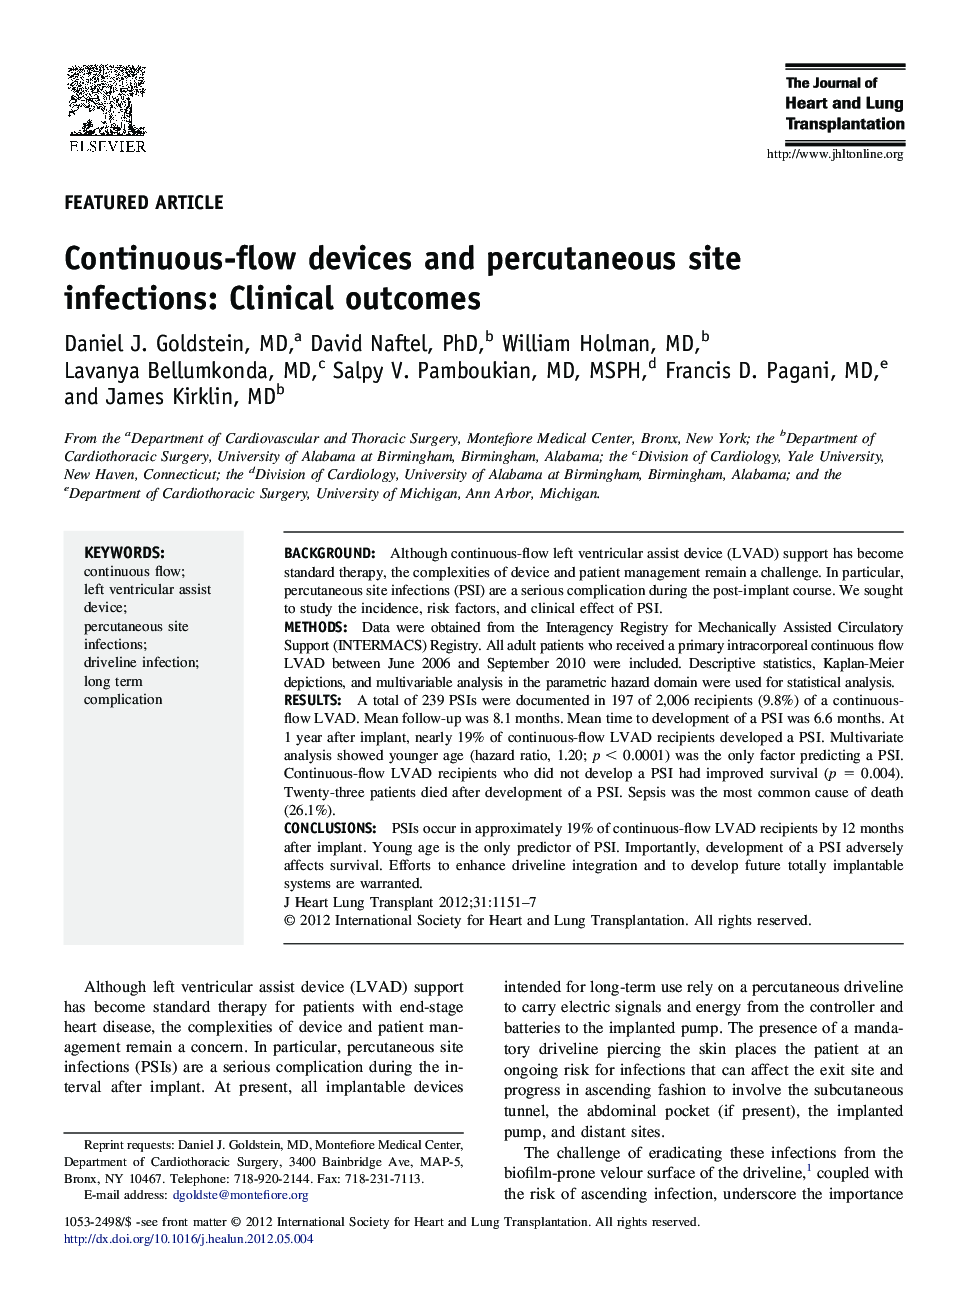 Continuous-flow devices and percutaneous site infections: Clinical outcomes